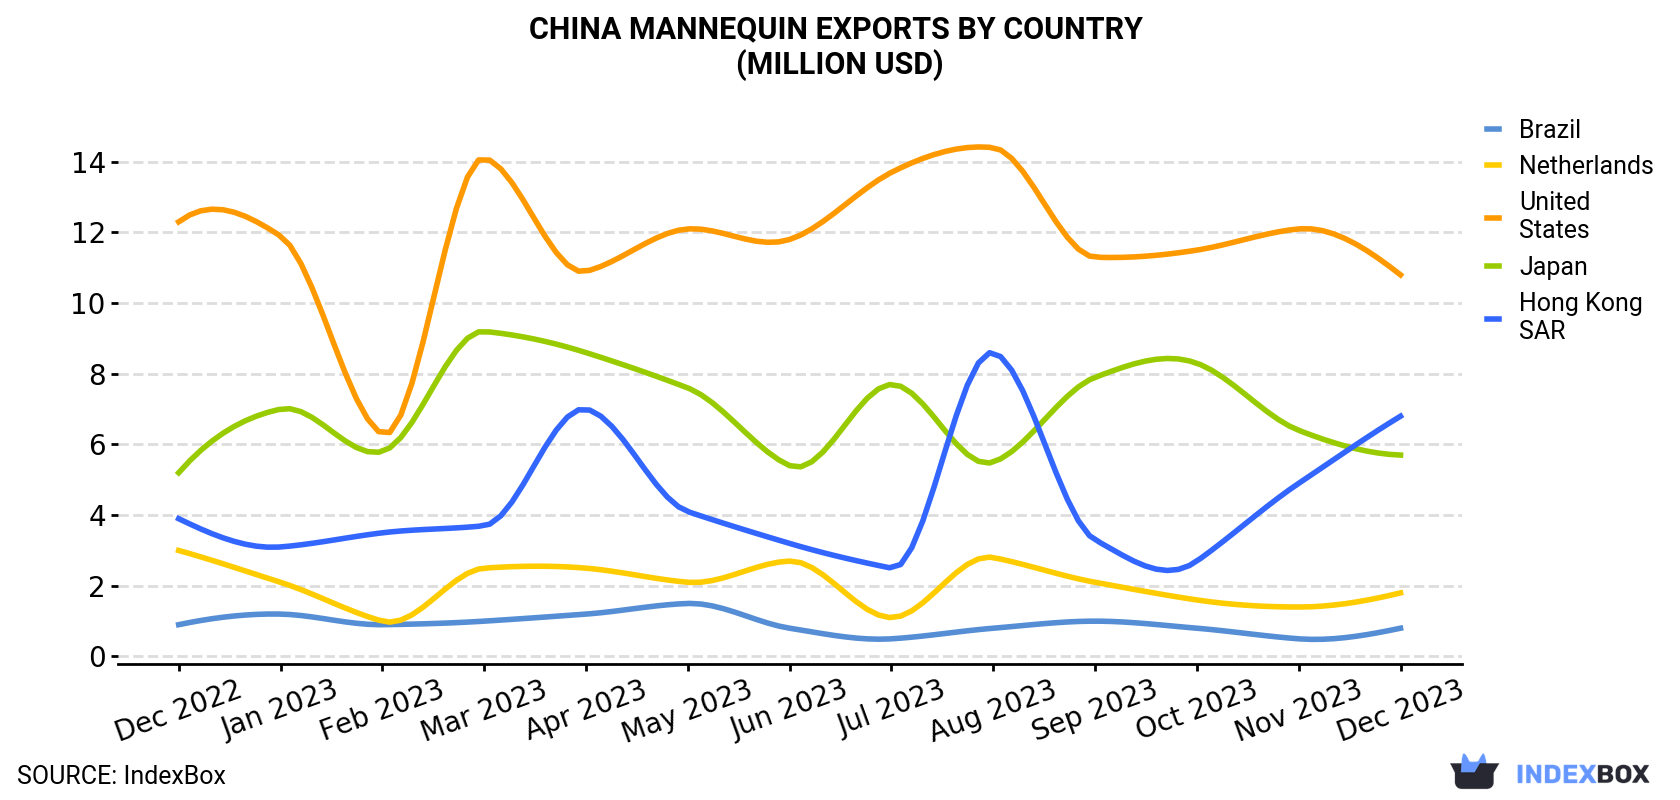 China Mannequin Exports By Country (Million USD)